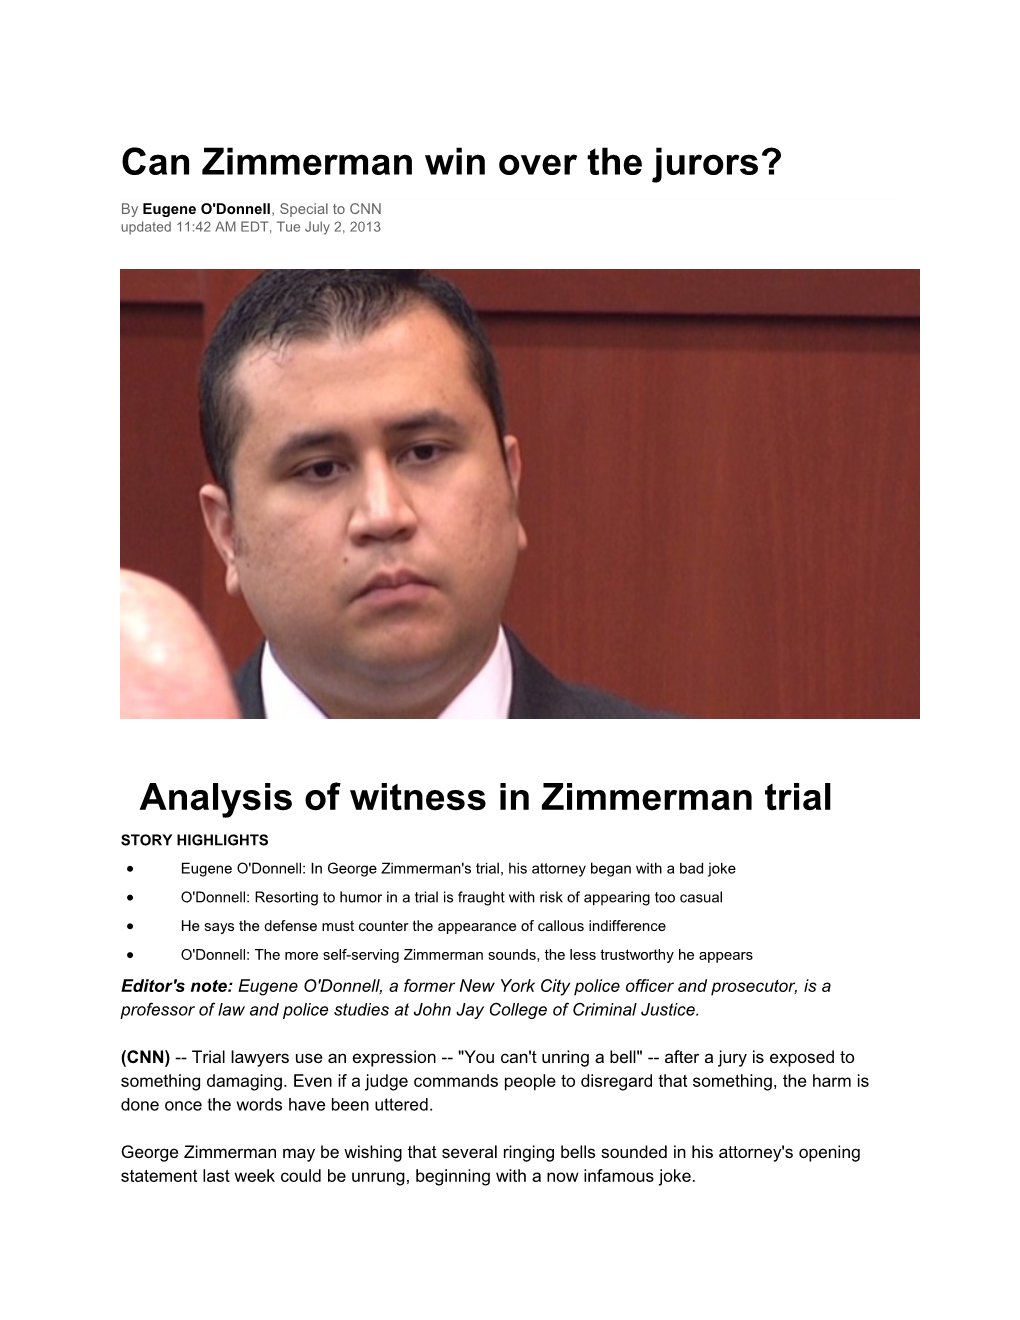 Can Zimmerman Win Over the Jurors?